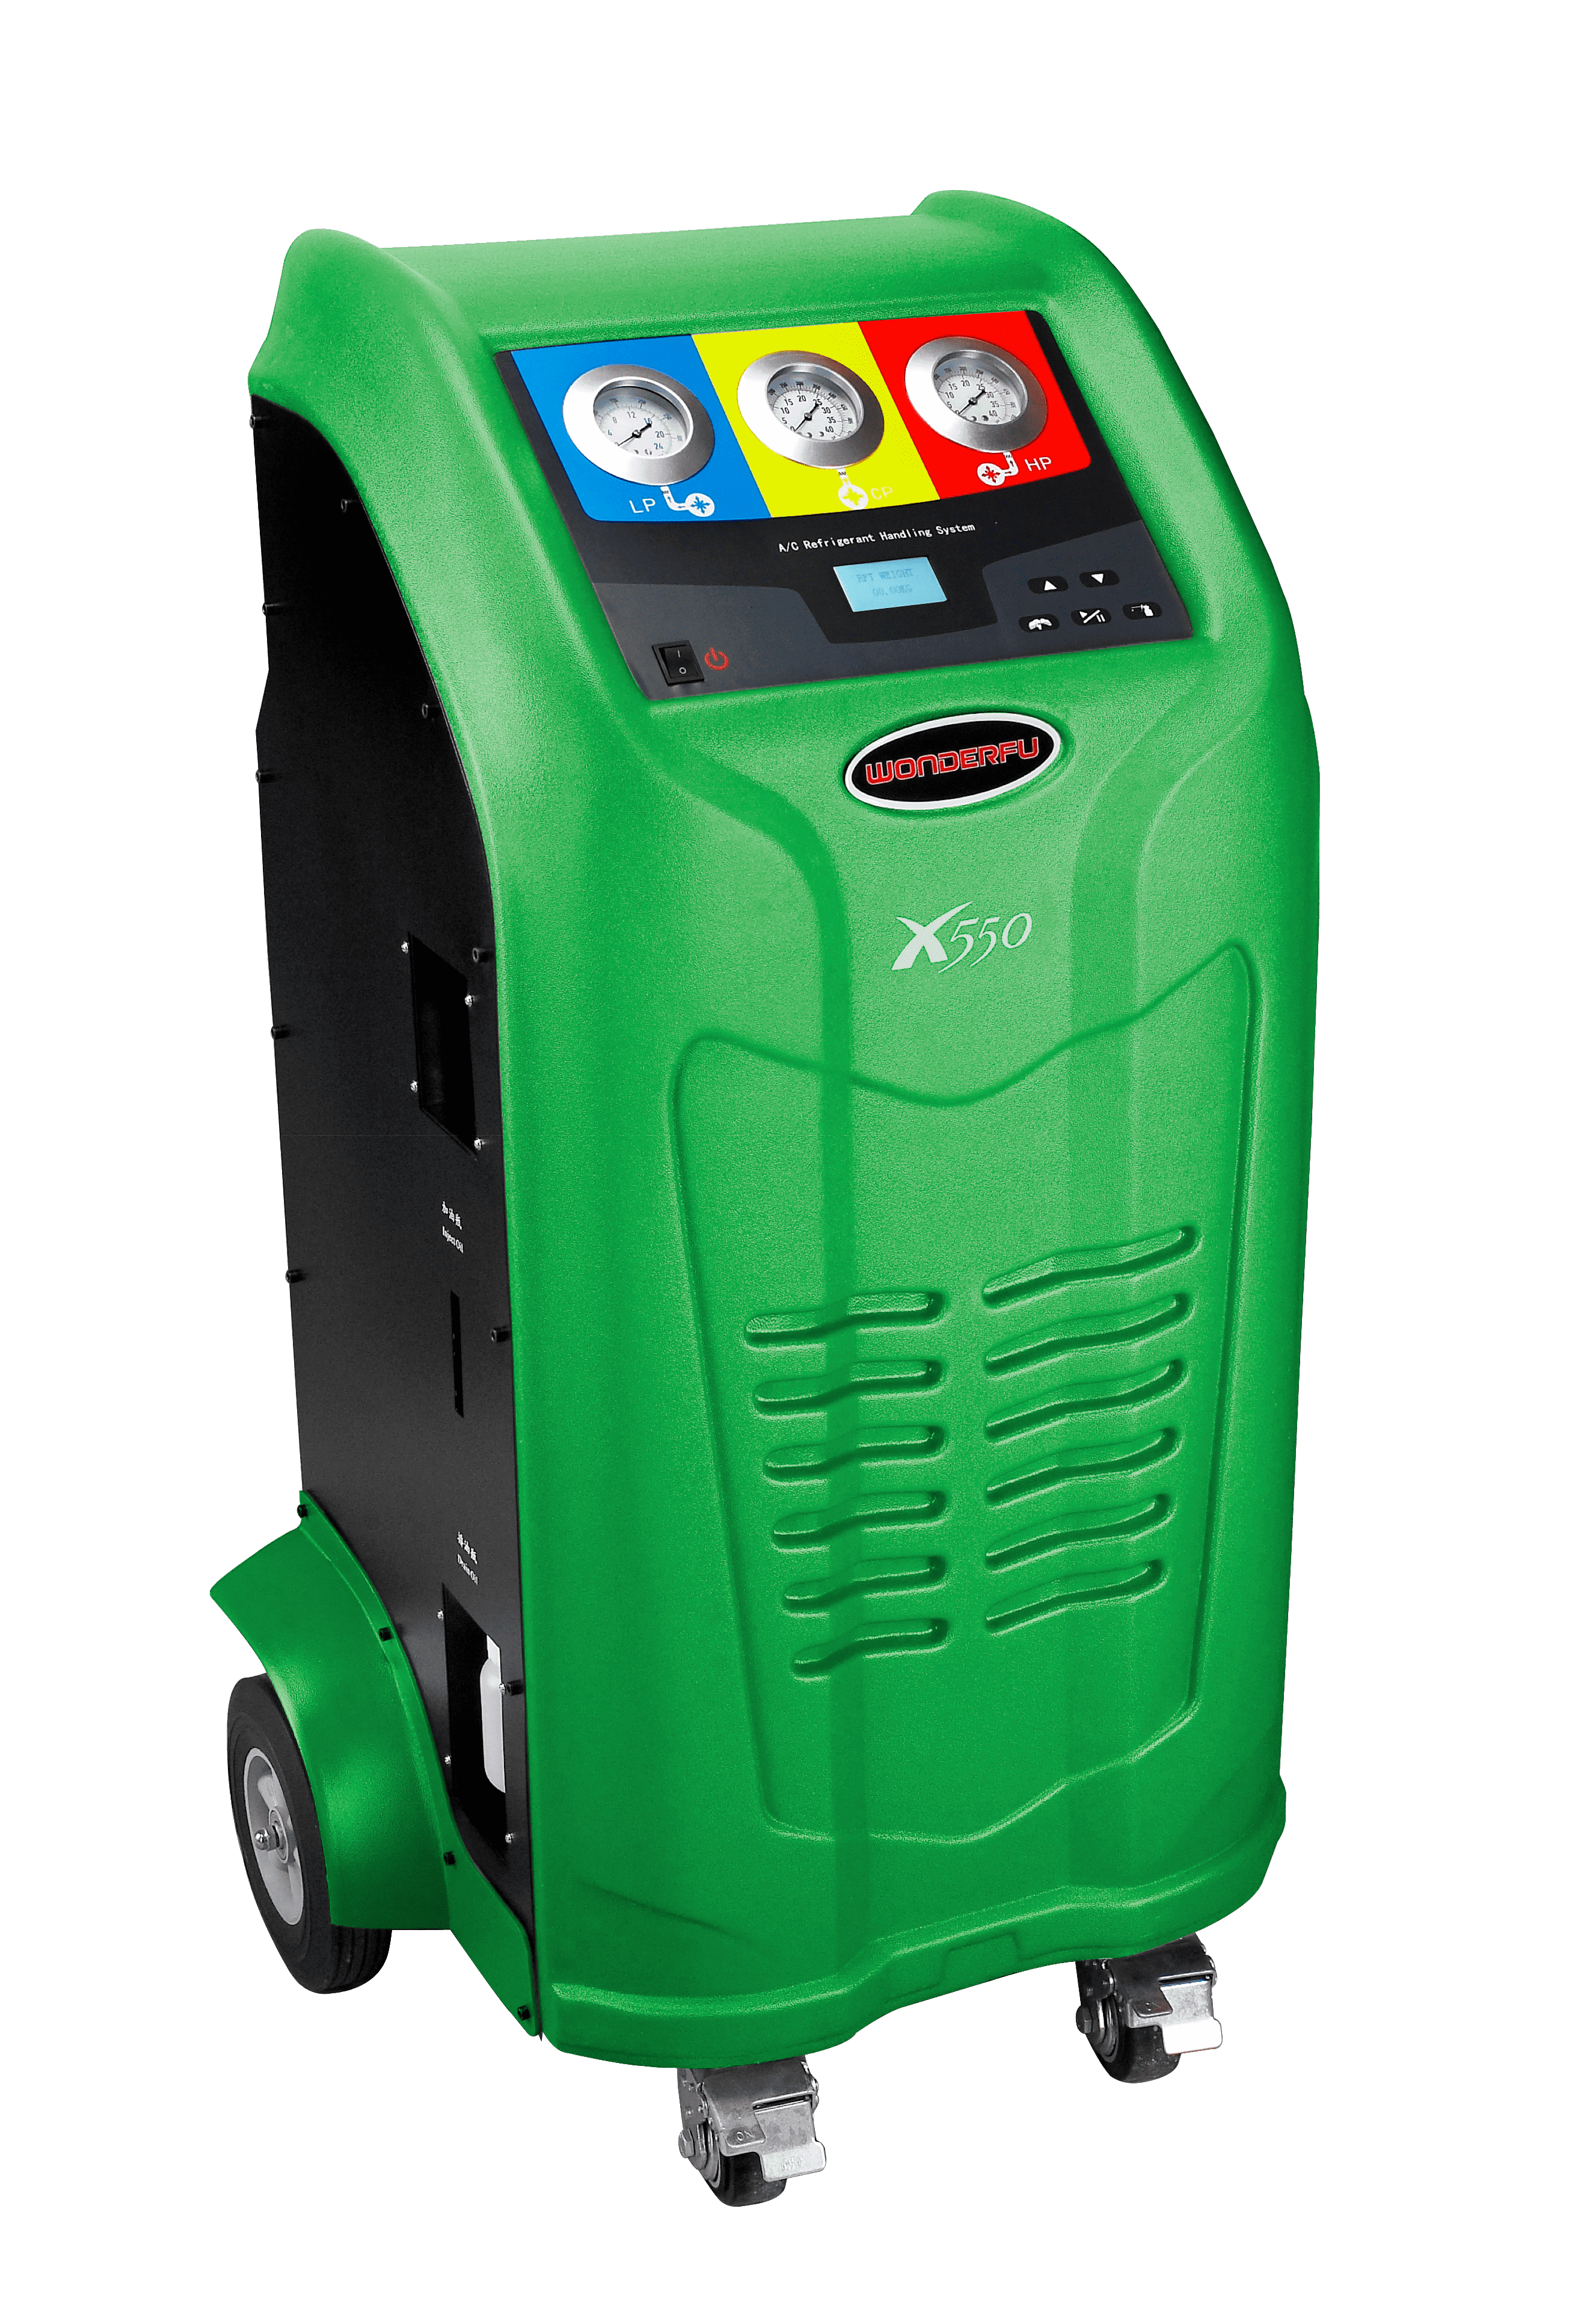 Green Bus Tank Large Refrigerant Recovery Machine For 134a 5 Inch LCD 1200g/min